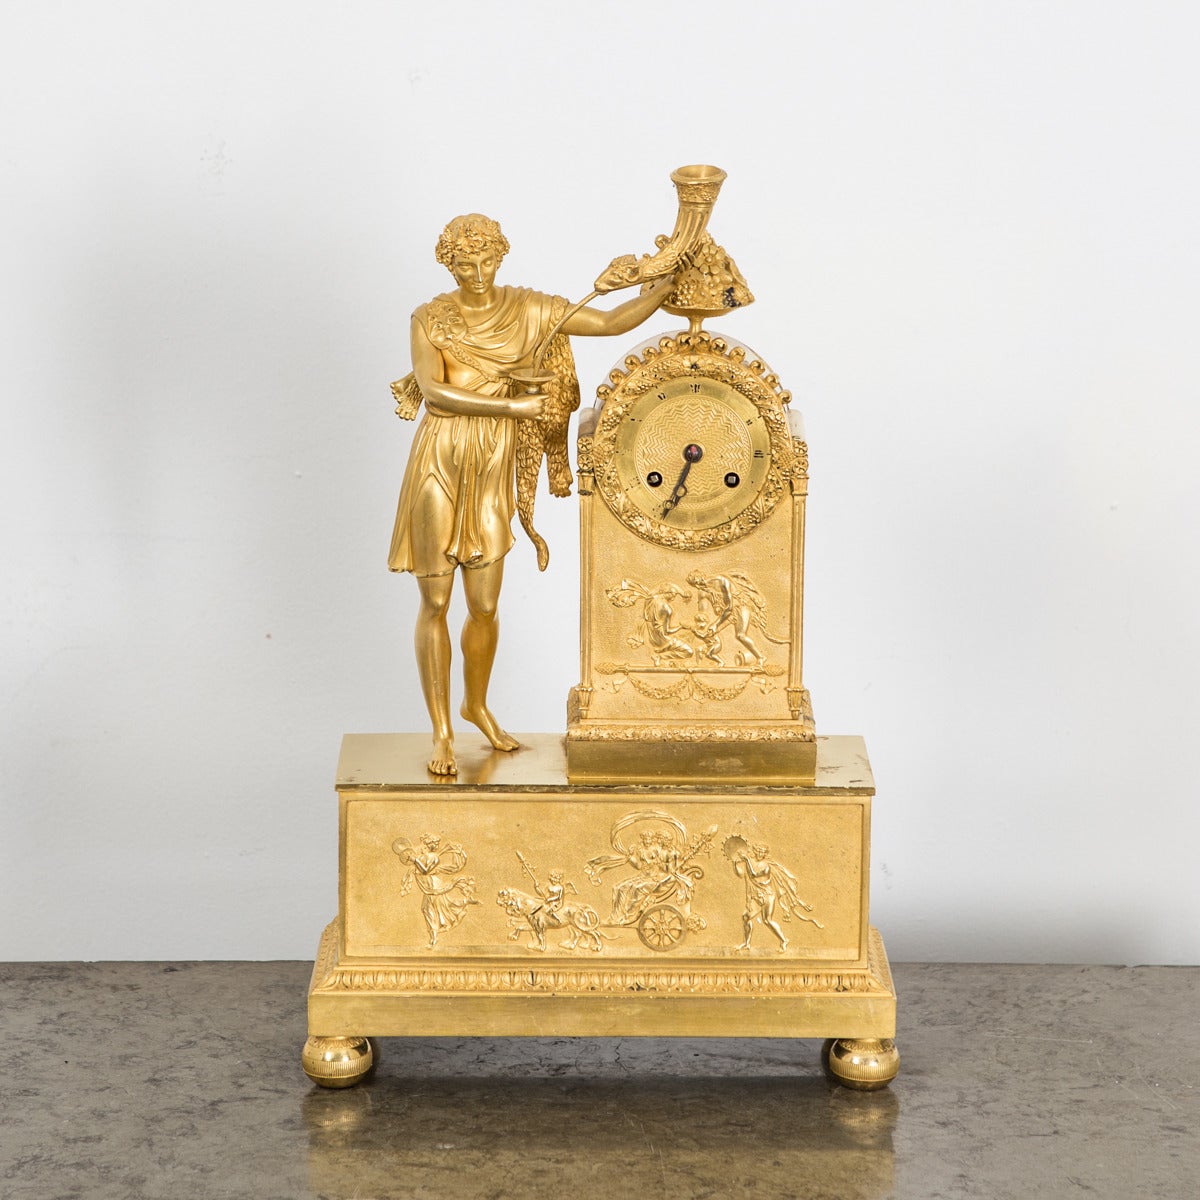 Clock Mantle Gilt Bronze Neoclassical Empire French 19th Century France. A French mantle in gilt bronze decorated with neoclassical symbols such as Roman man dressed in a Toga carrying a horn - the symbol for wealth.